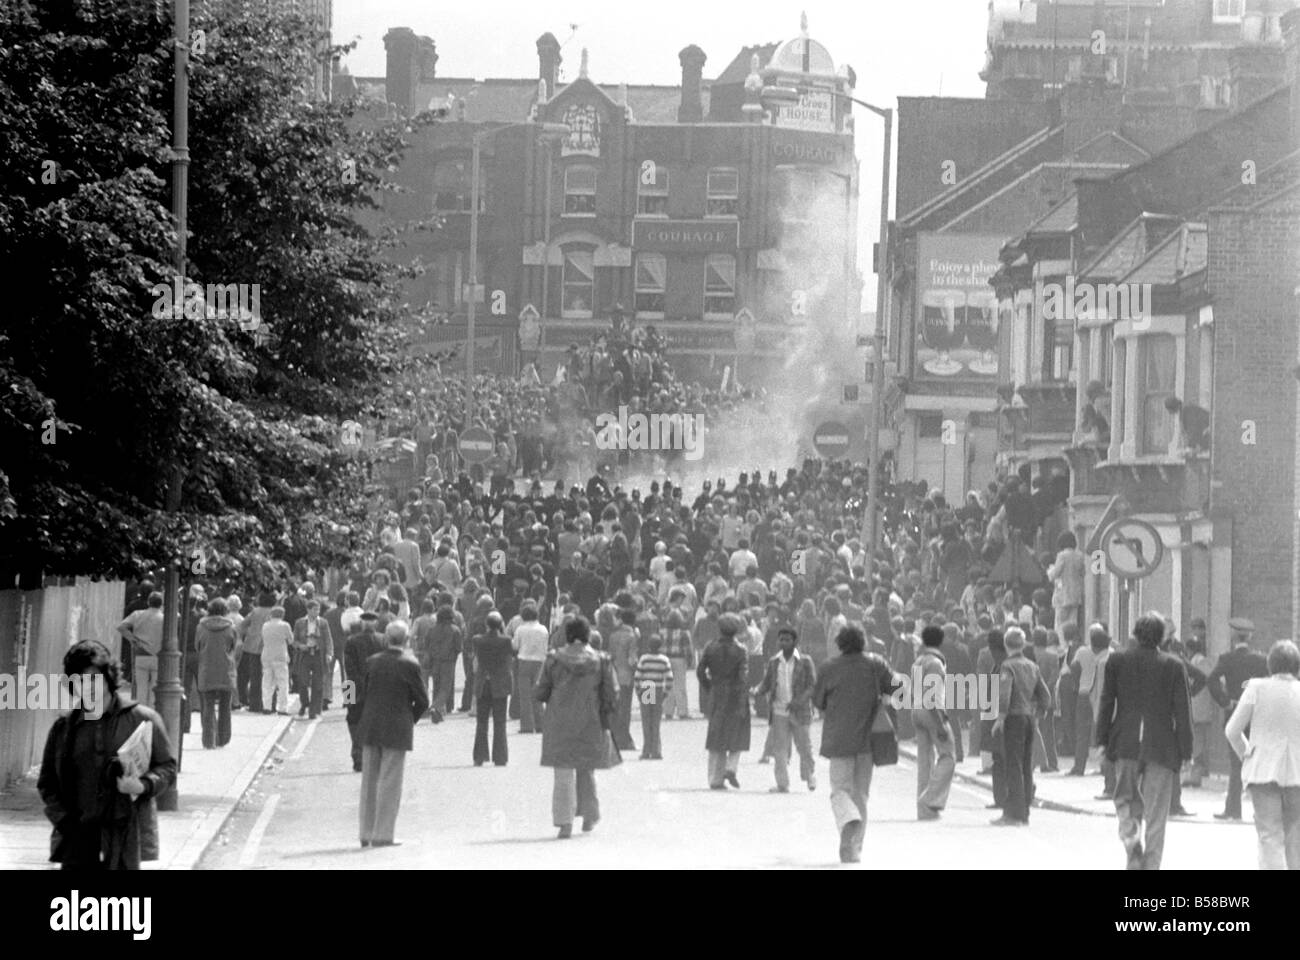 Lewisham Riot 1977 : General view of rioting in Lewisham Hight Street following a Mar. by the National Front. The Mar. was confr Stock Photo